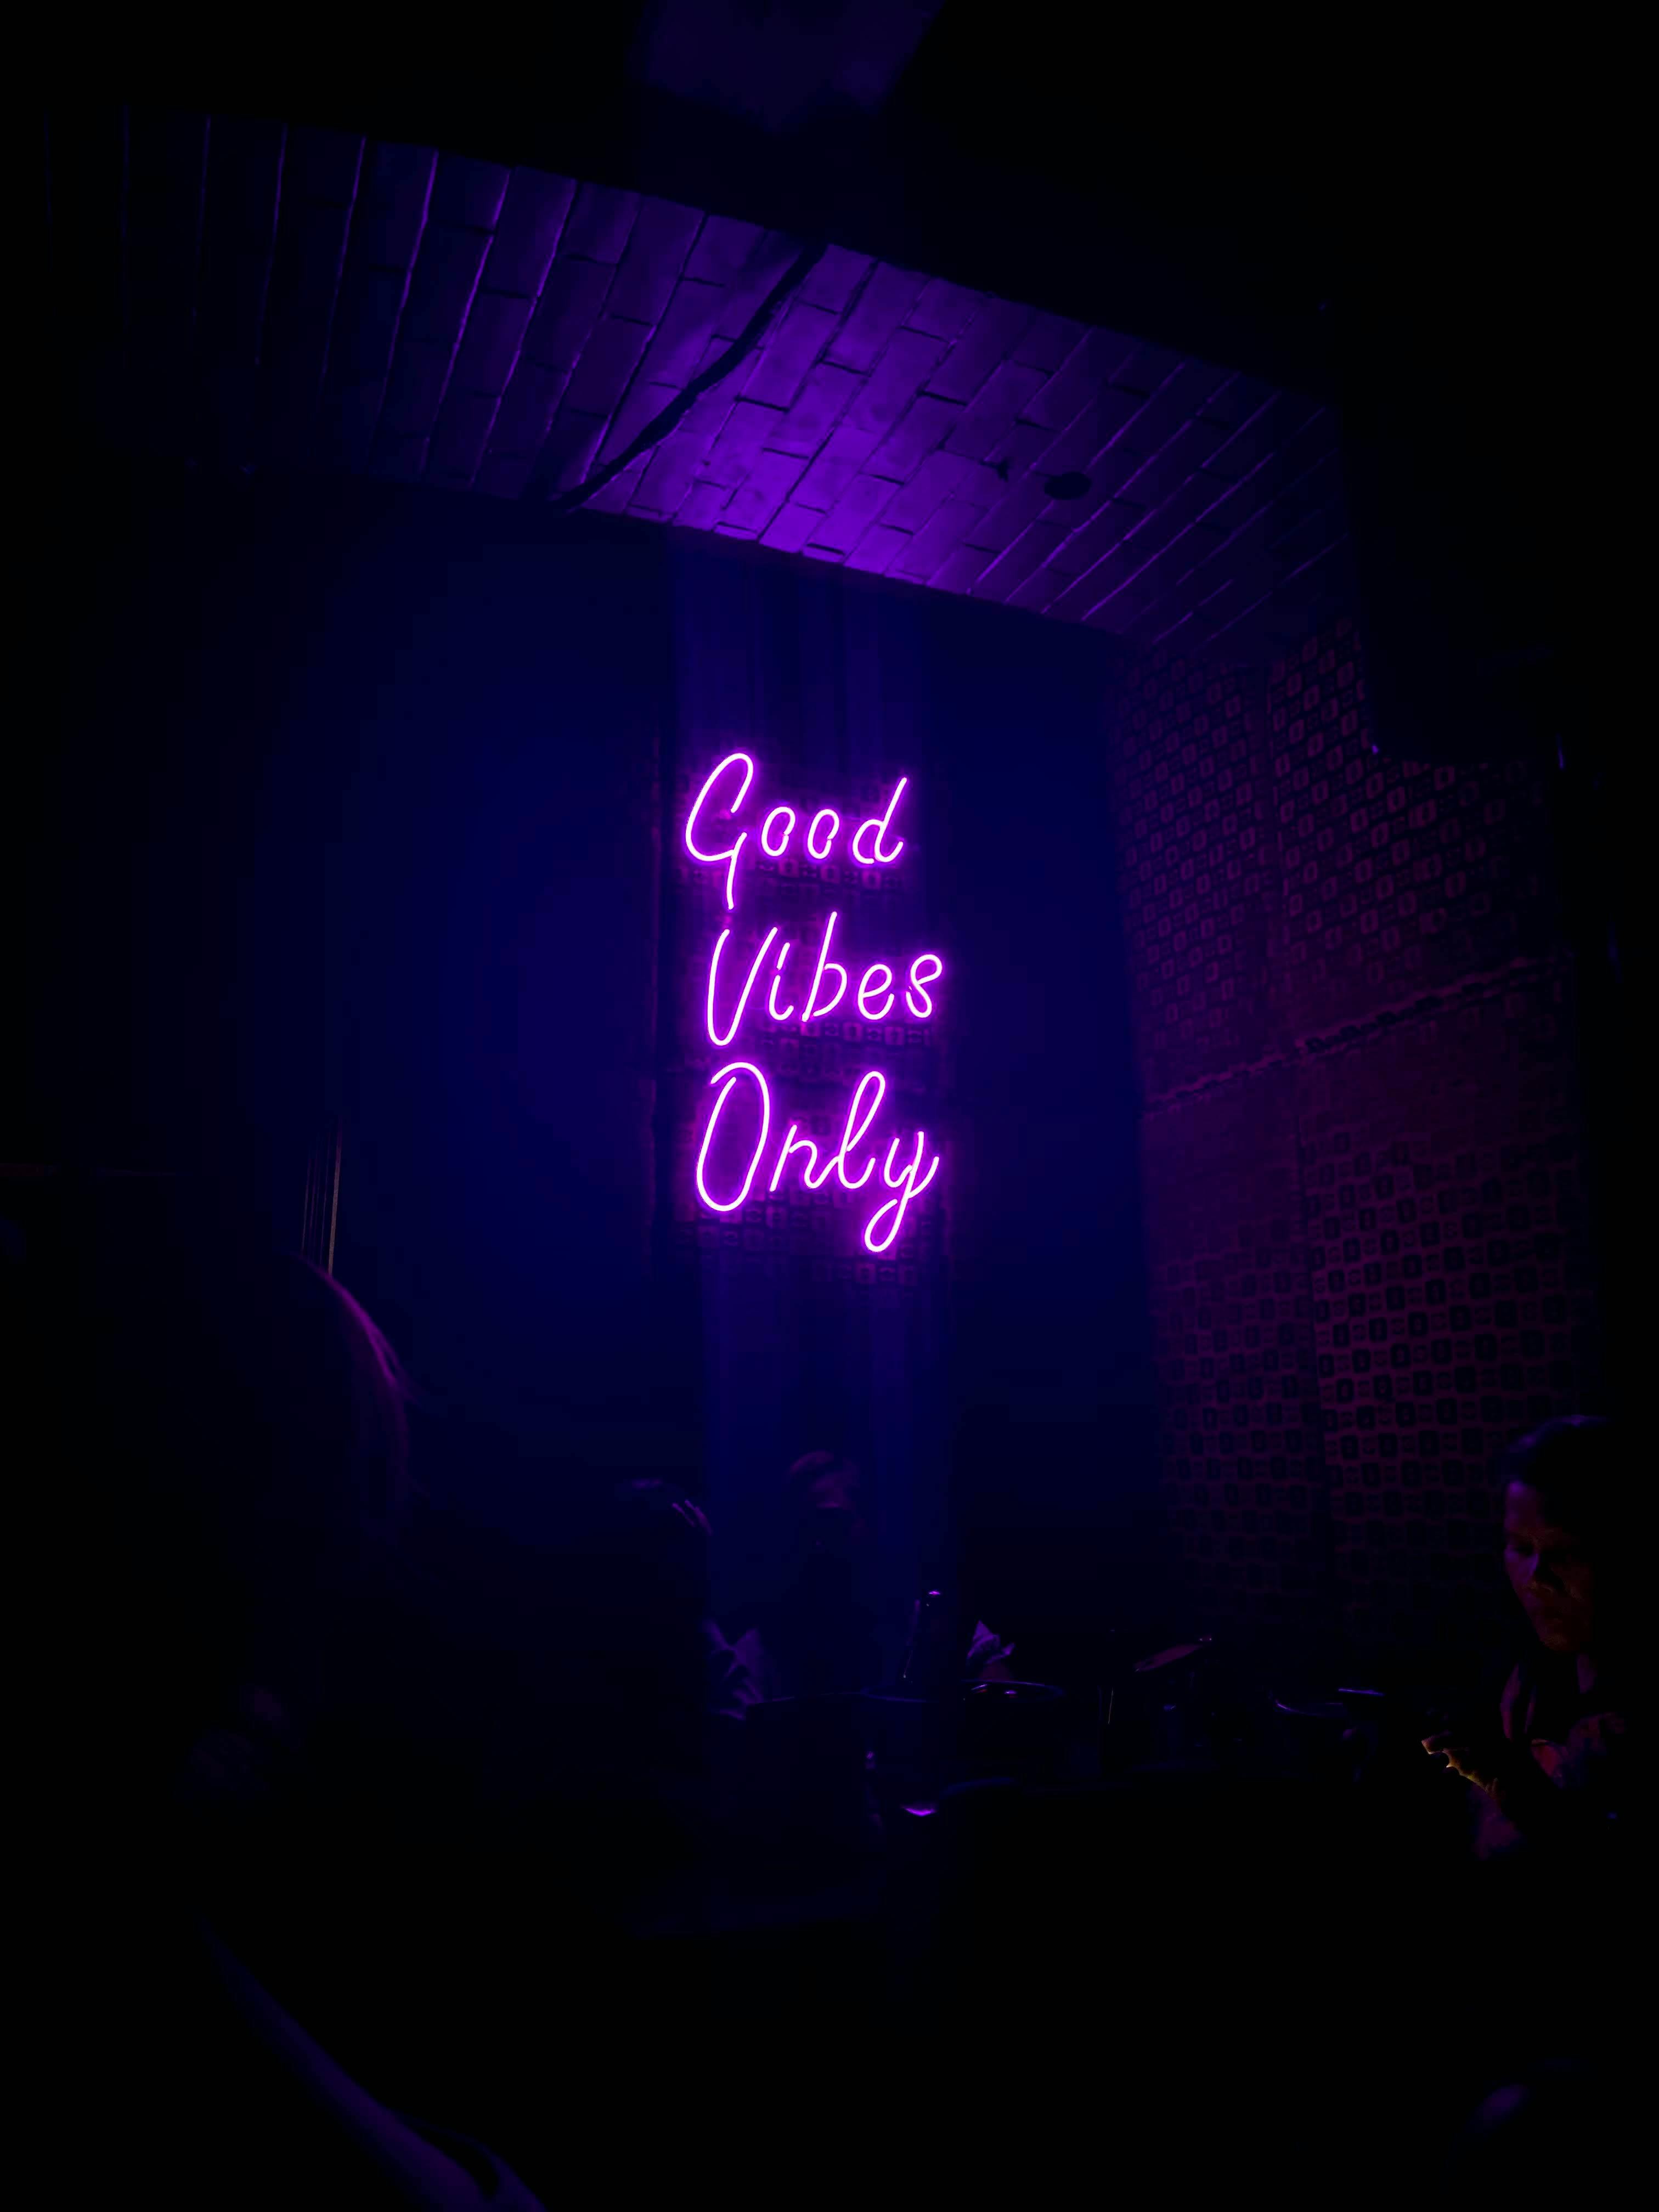 Good Vibes Only Photos Download The BEST Free Good Vibes Only Stock Photos   HD Images